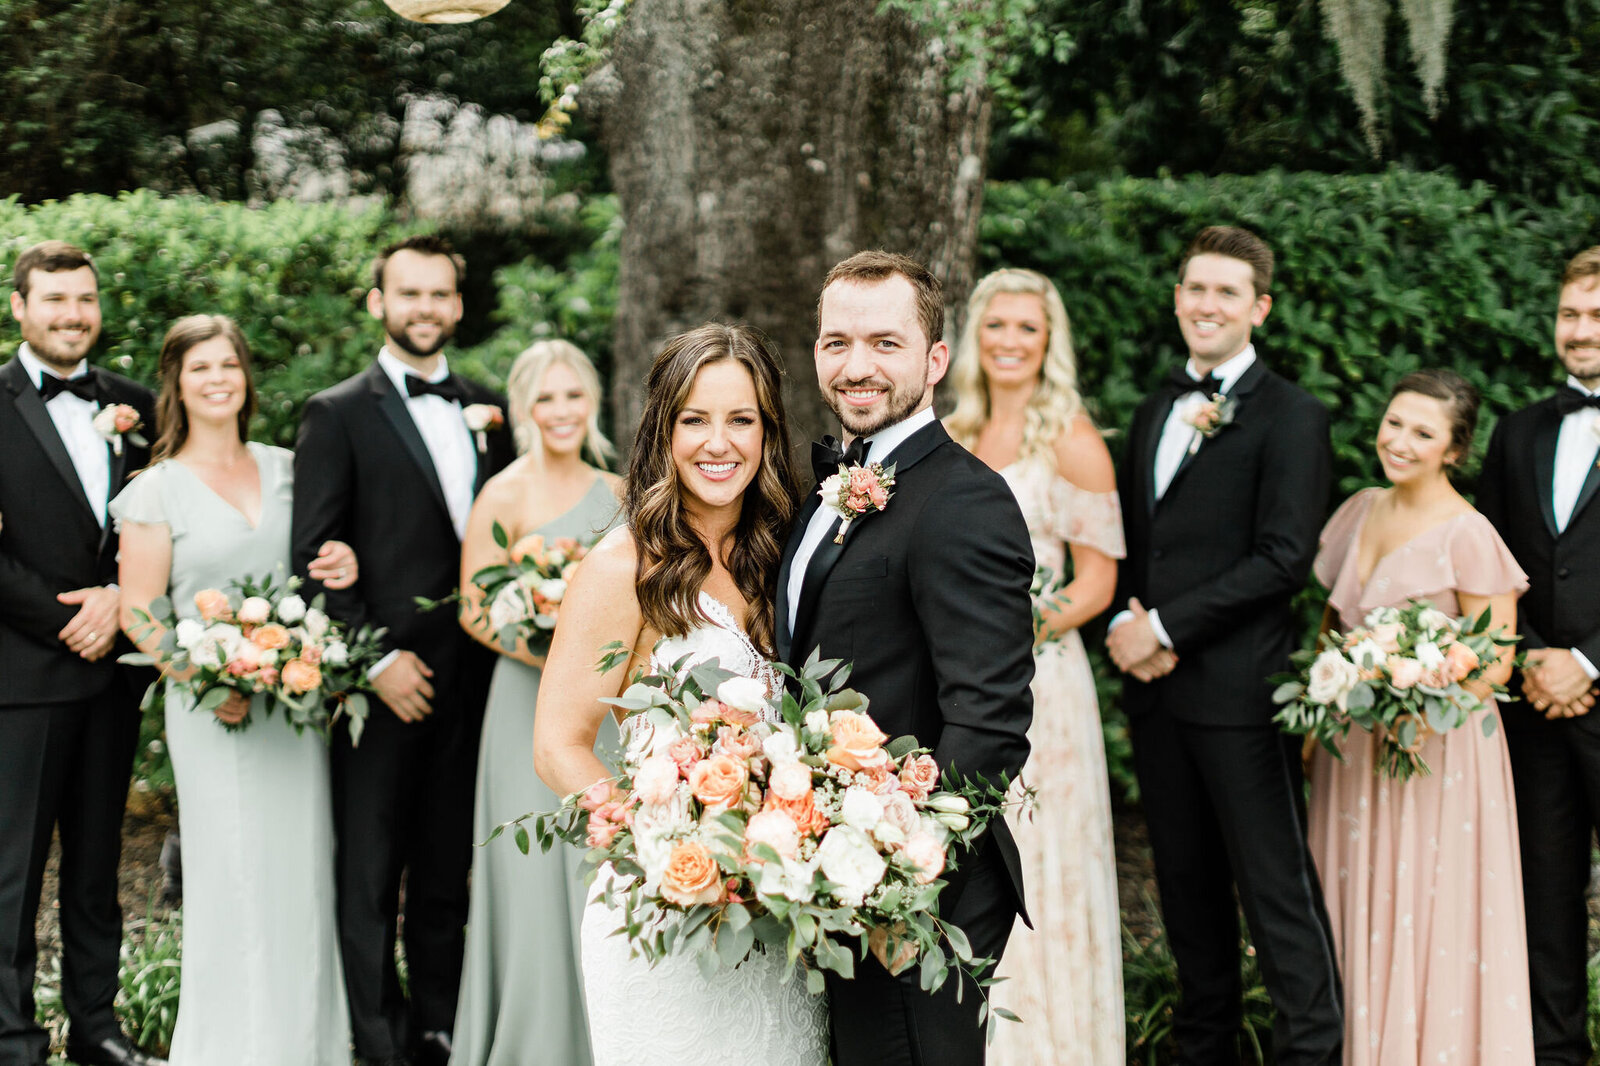 Bridal Party Photos in Front of the Oak Tree | Wrightsville Manor, Wrightsville Beach NC | The Axtells Photo and Film